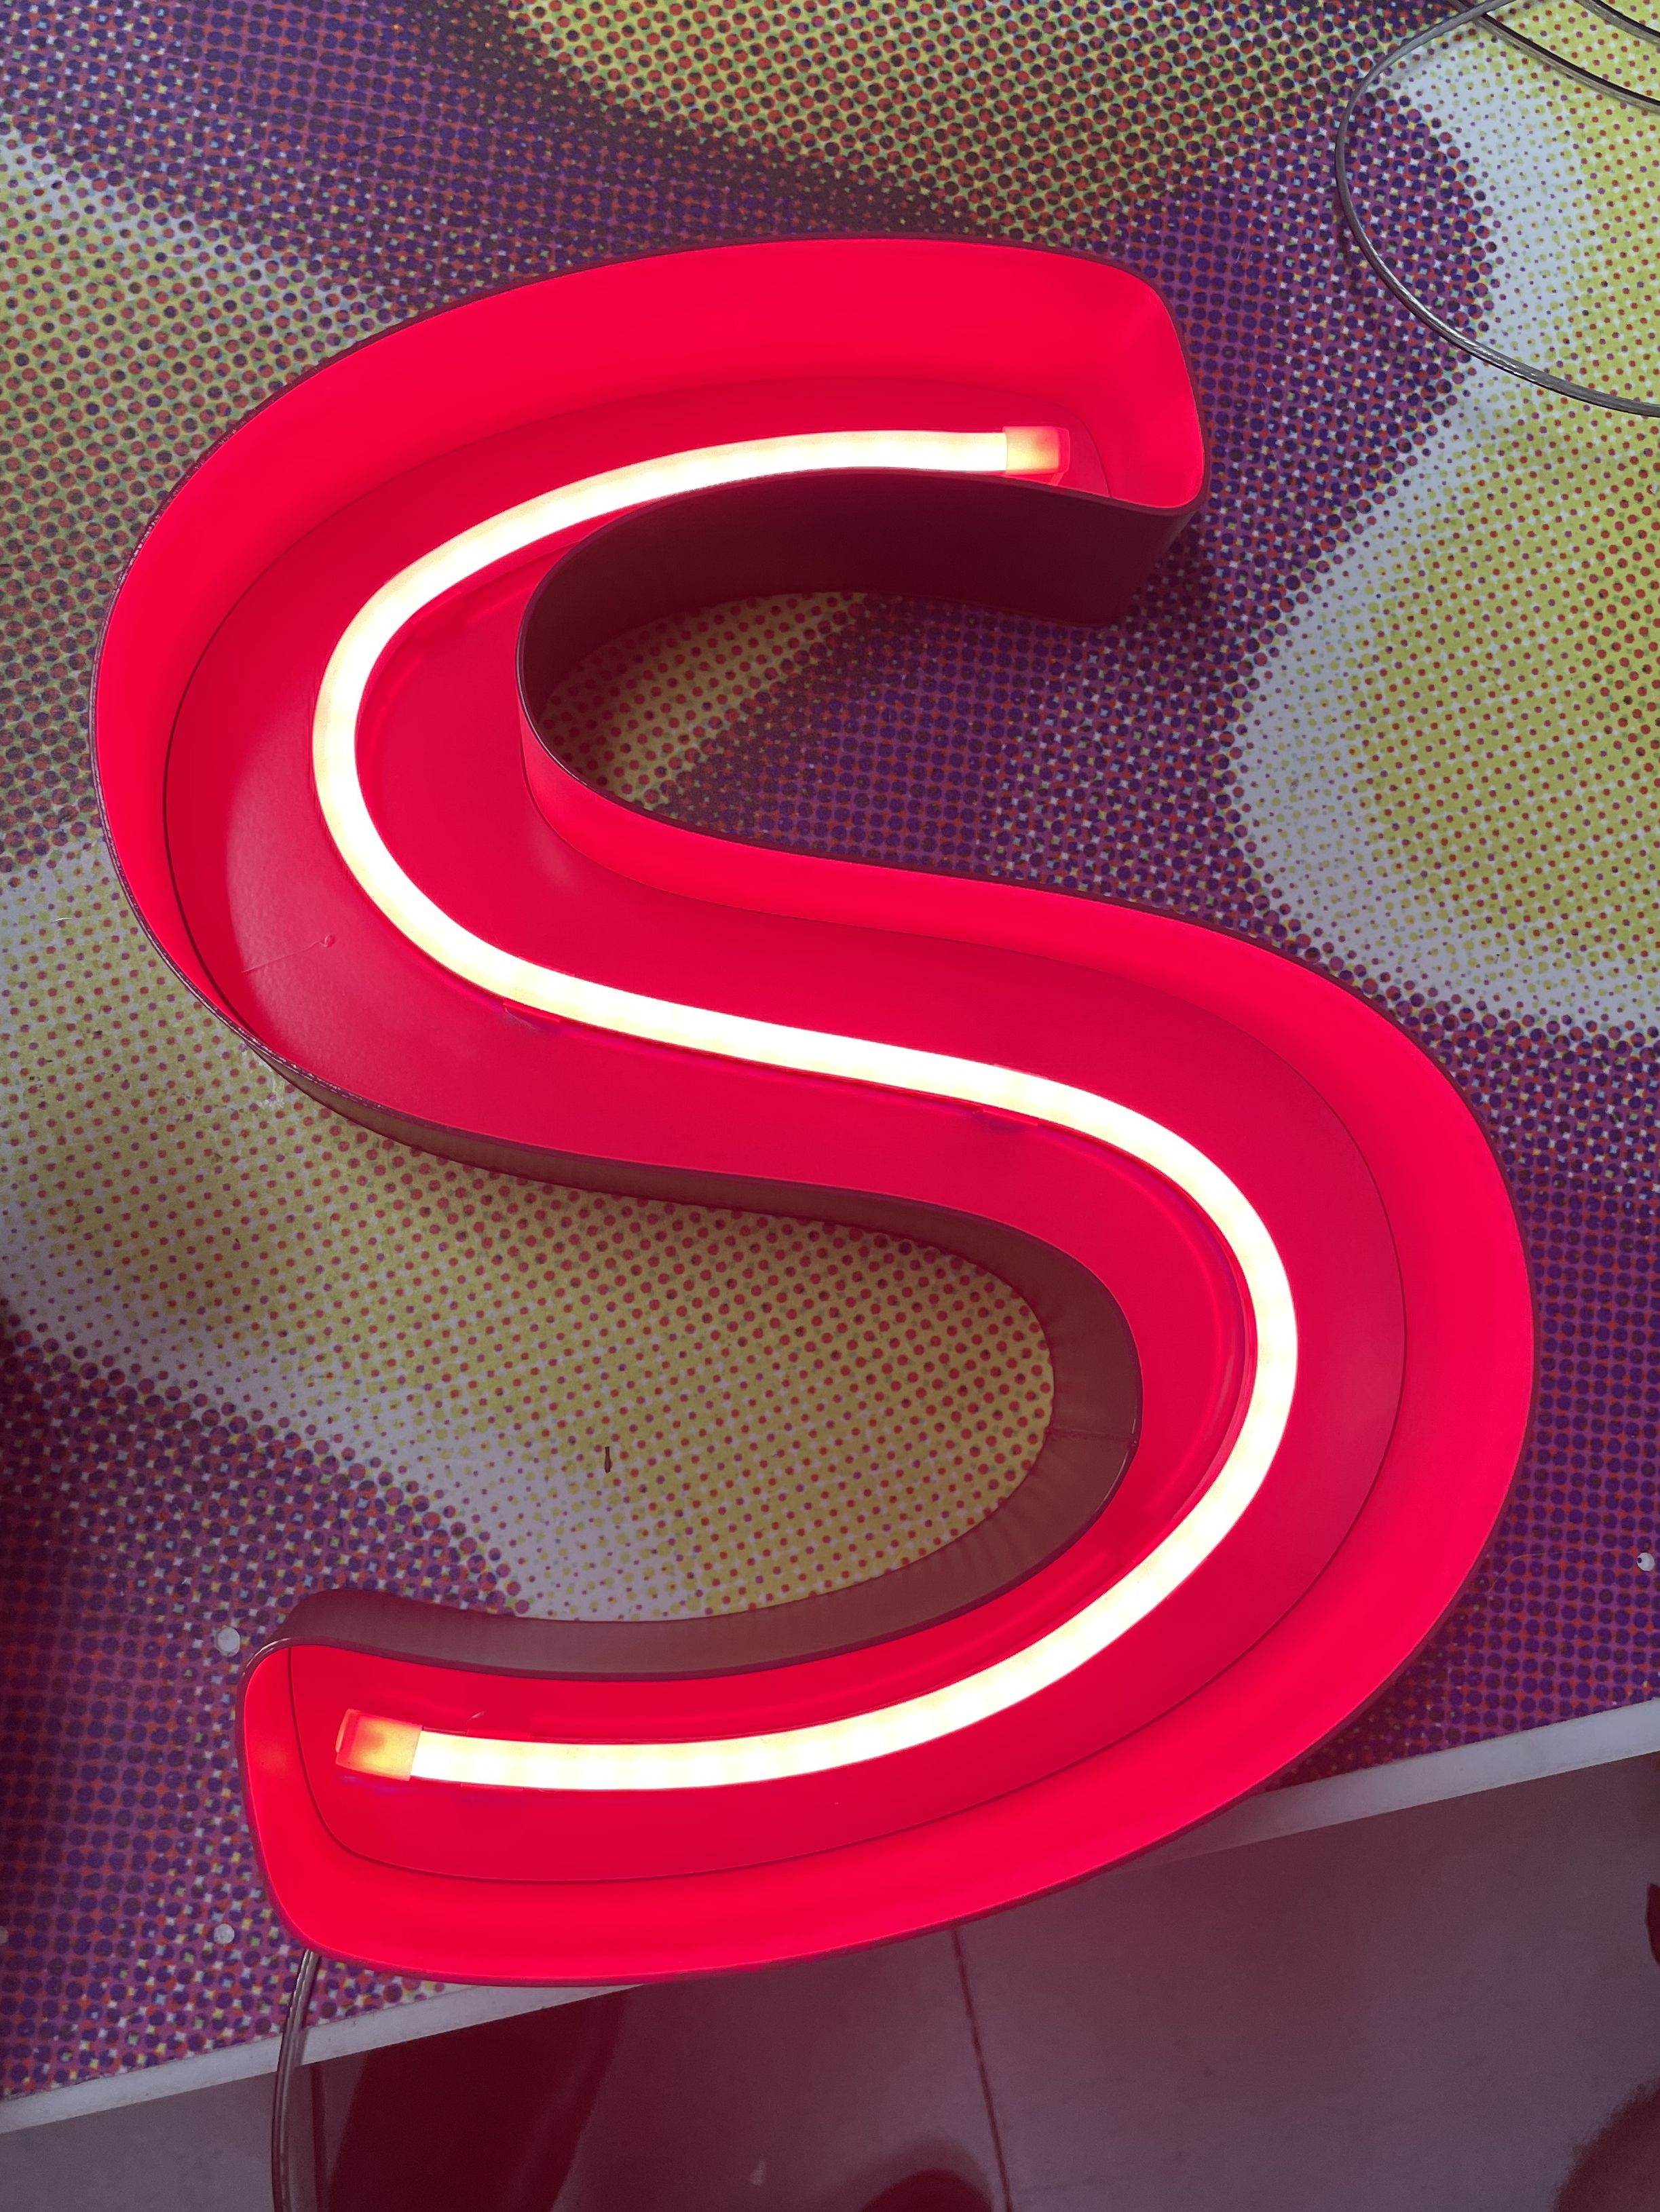 Cosmetics Plus 3D Printed Neon Signs